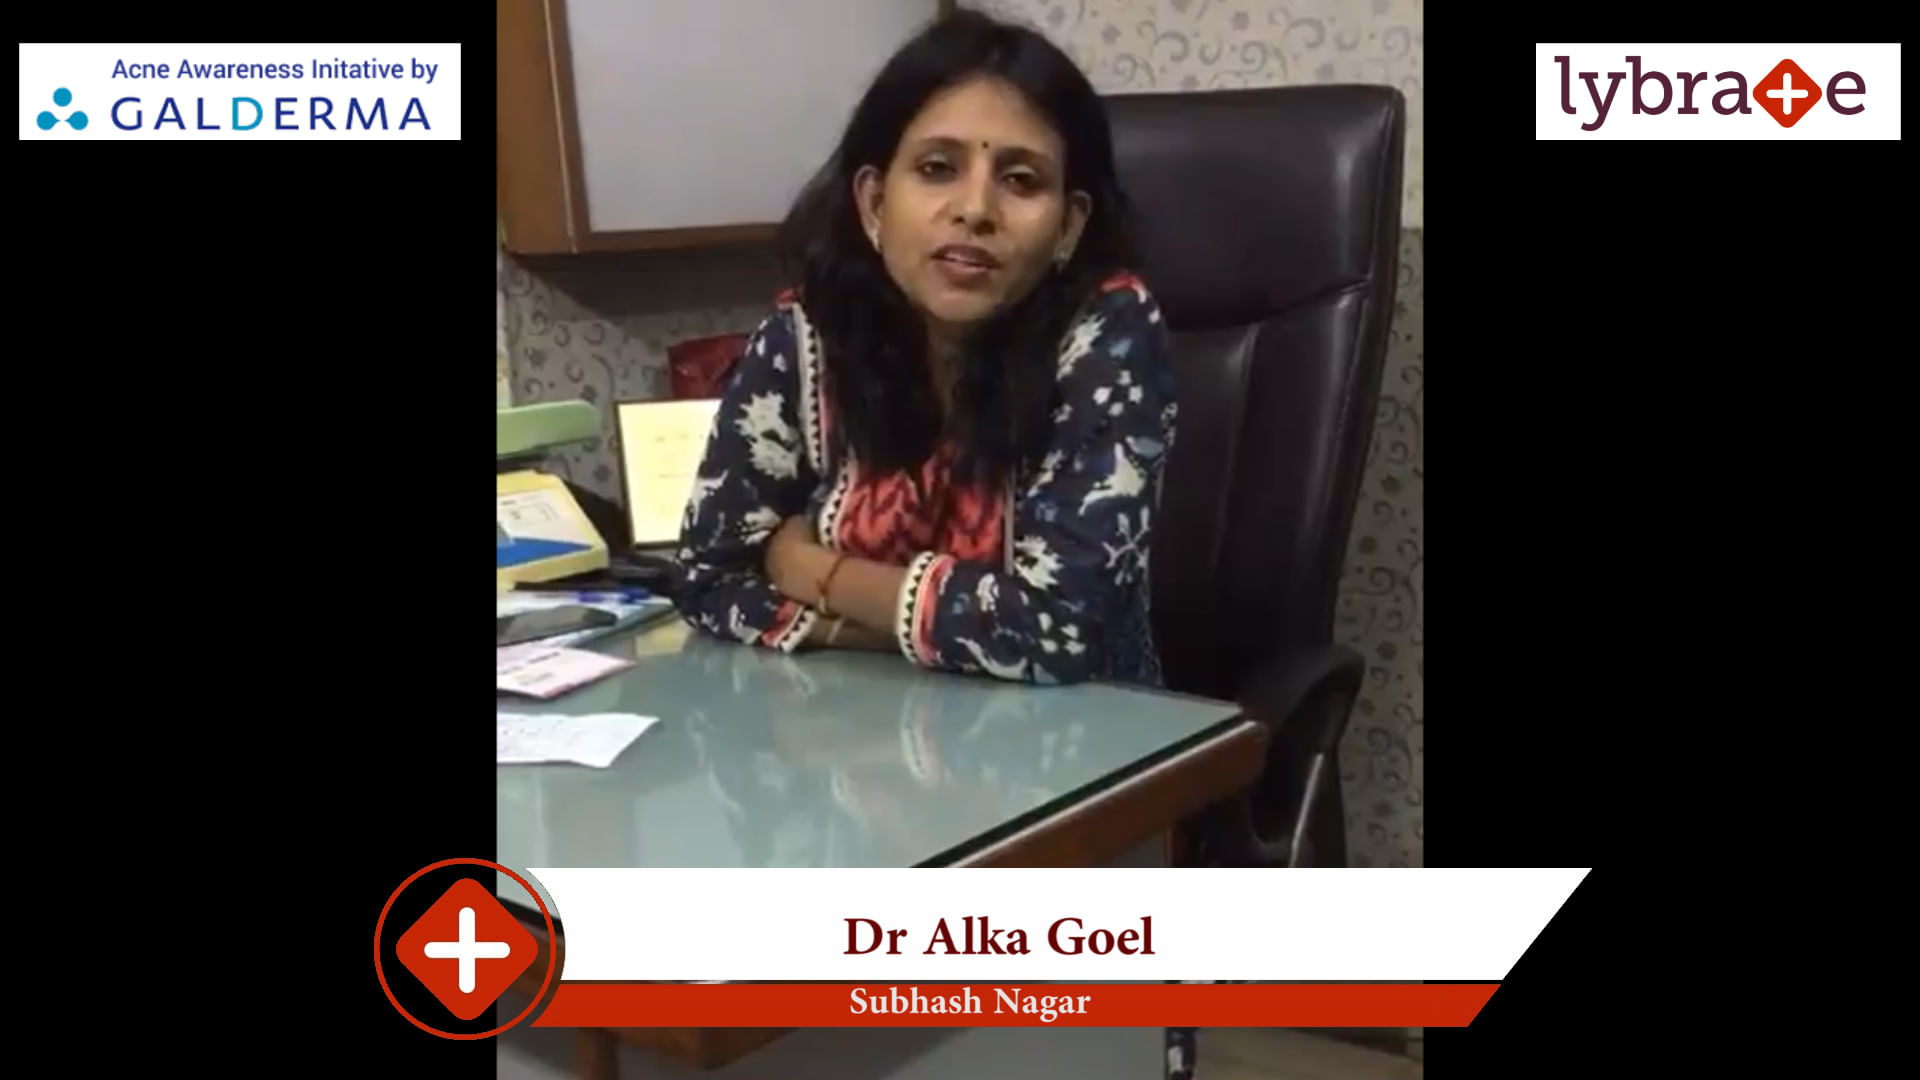 Lybrate | Dr. Alka Goel speaks on IMPORTANCE OF TREATING ACNE EARLY